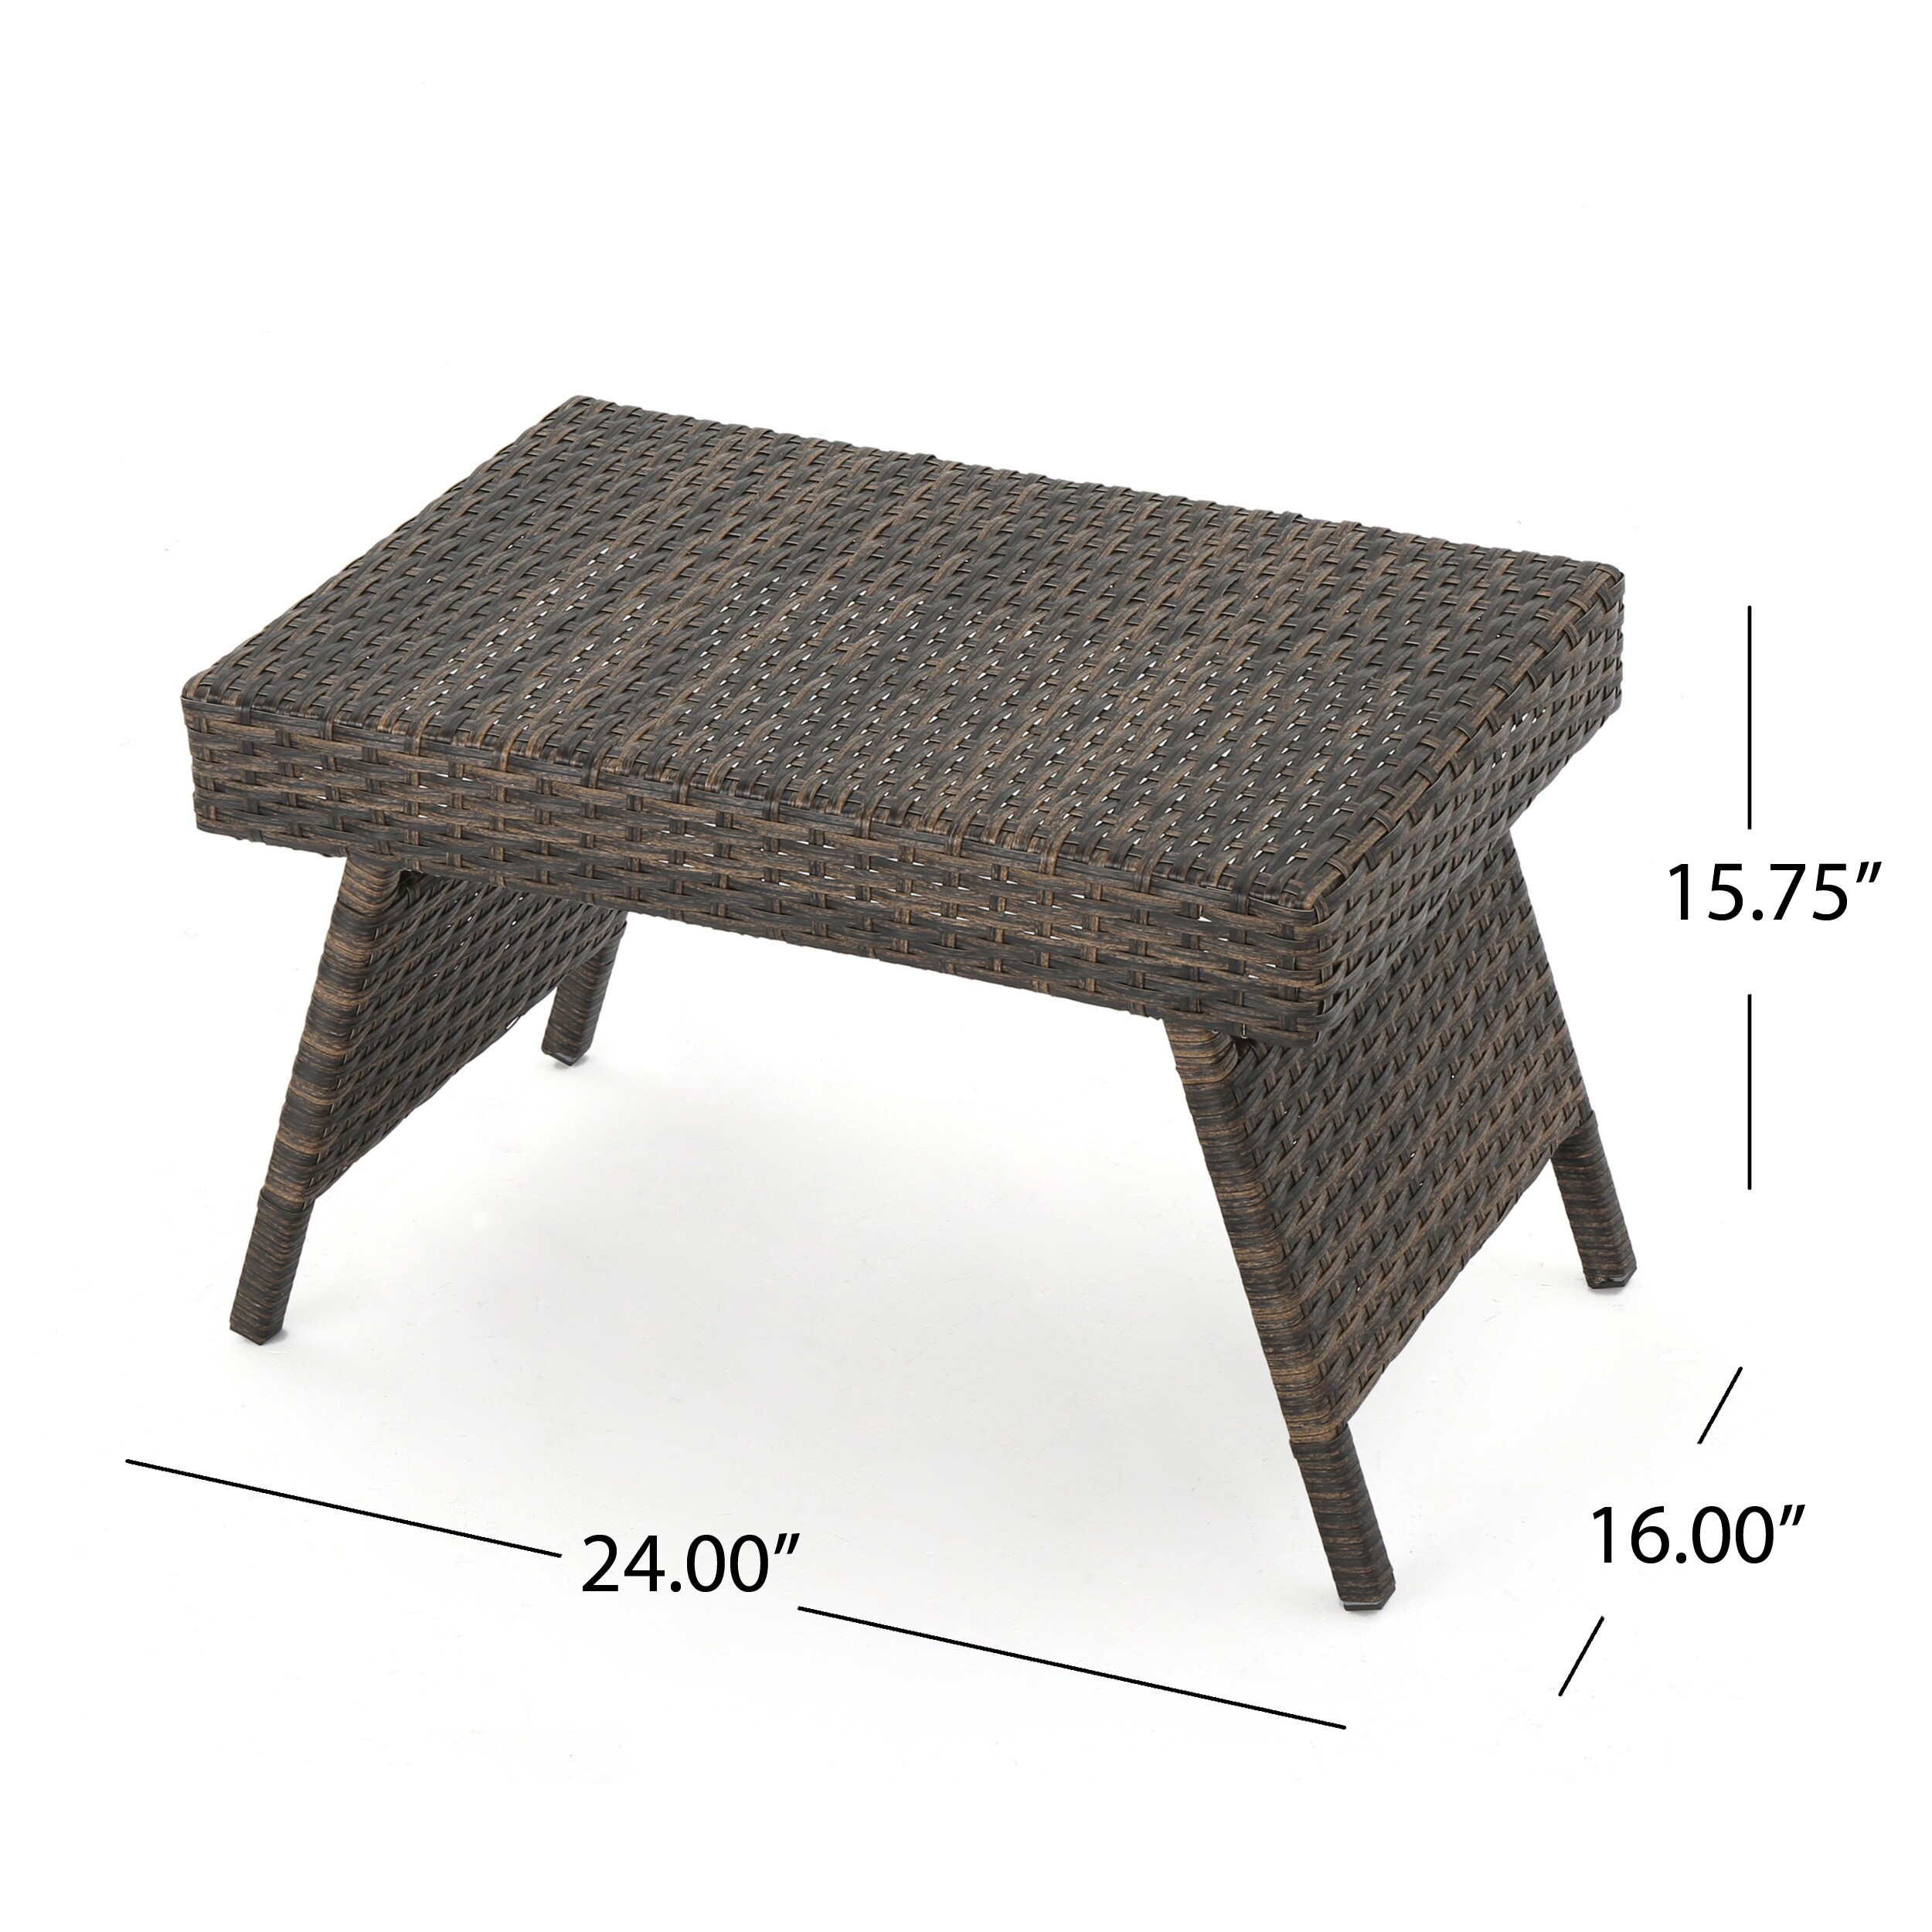 Thira Outdoor Wicker End Table - image 5 of 5